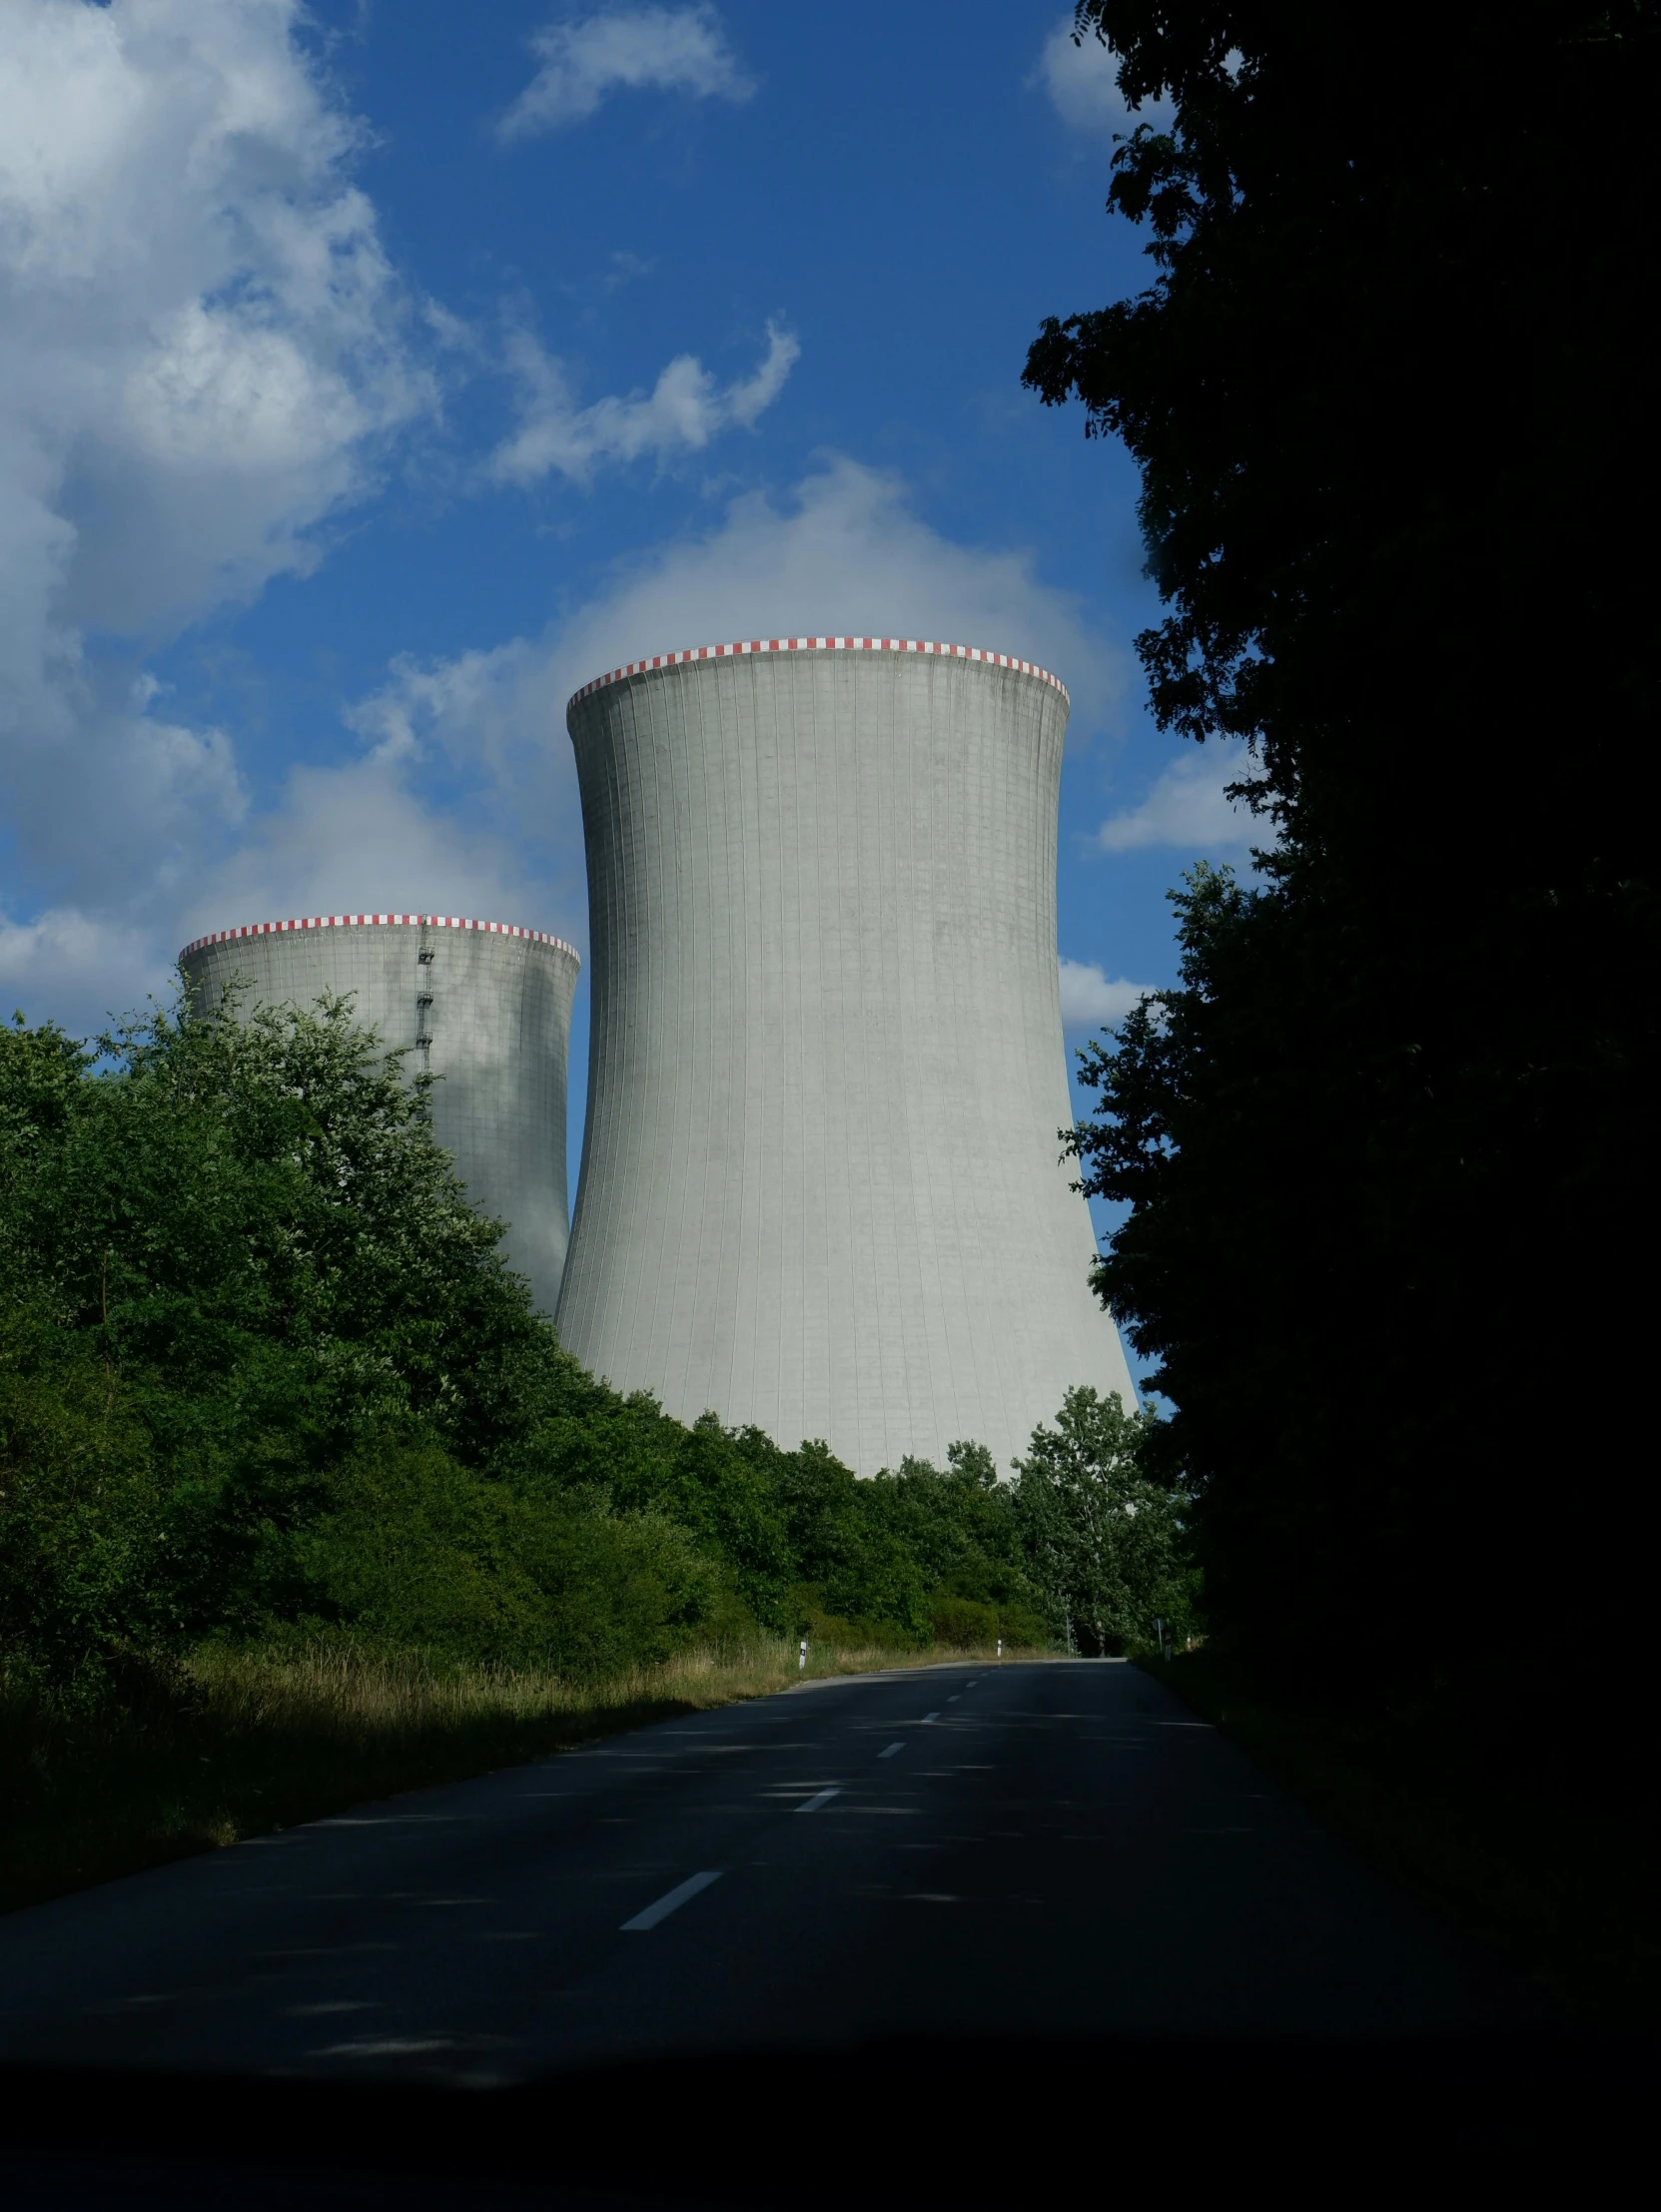 a nuclear power plant towering over a rural countryside